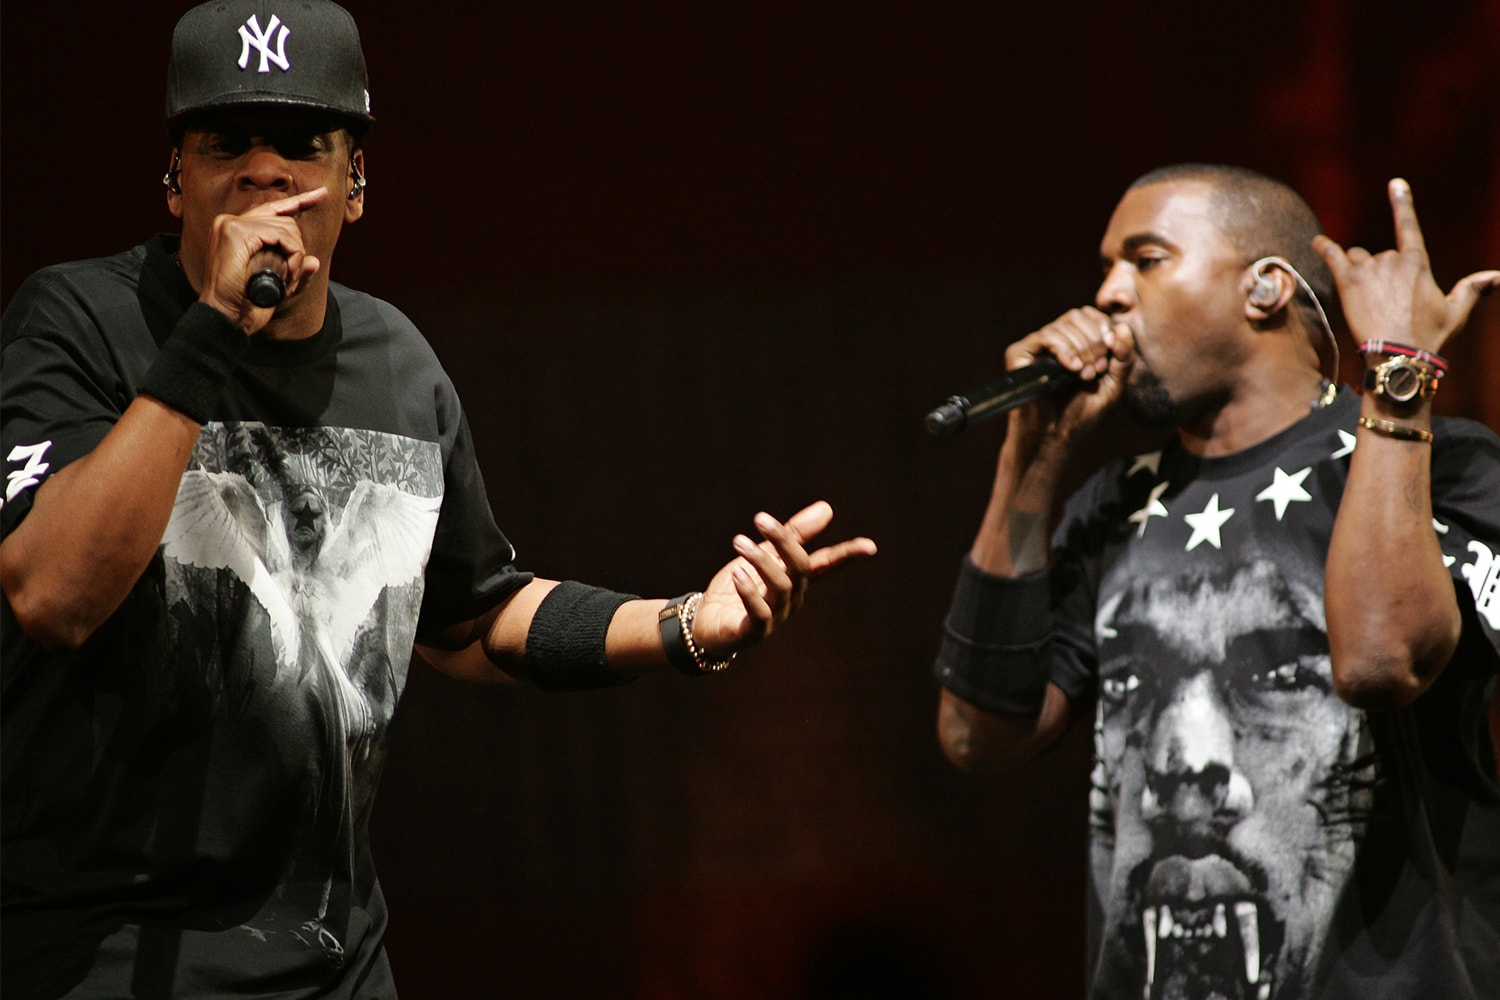 Jalil Peraza Watch the Throne Cross T-Shirt Kanye West JAY-Z Release info Buy Price Black White DONDA Rosewood movement HBX